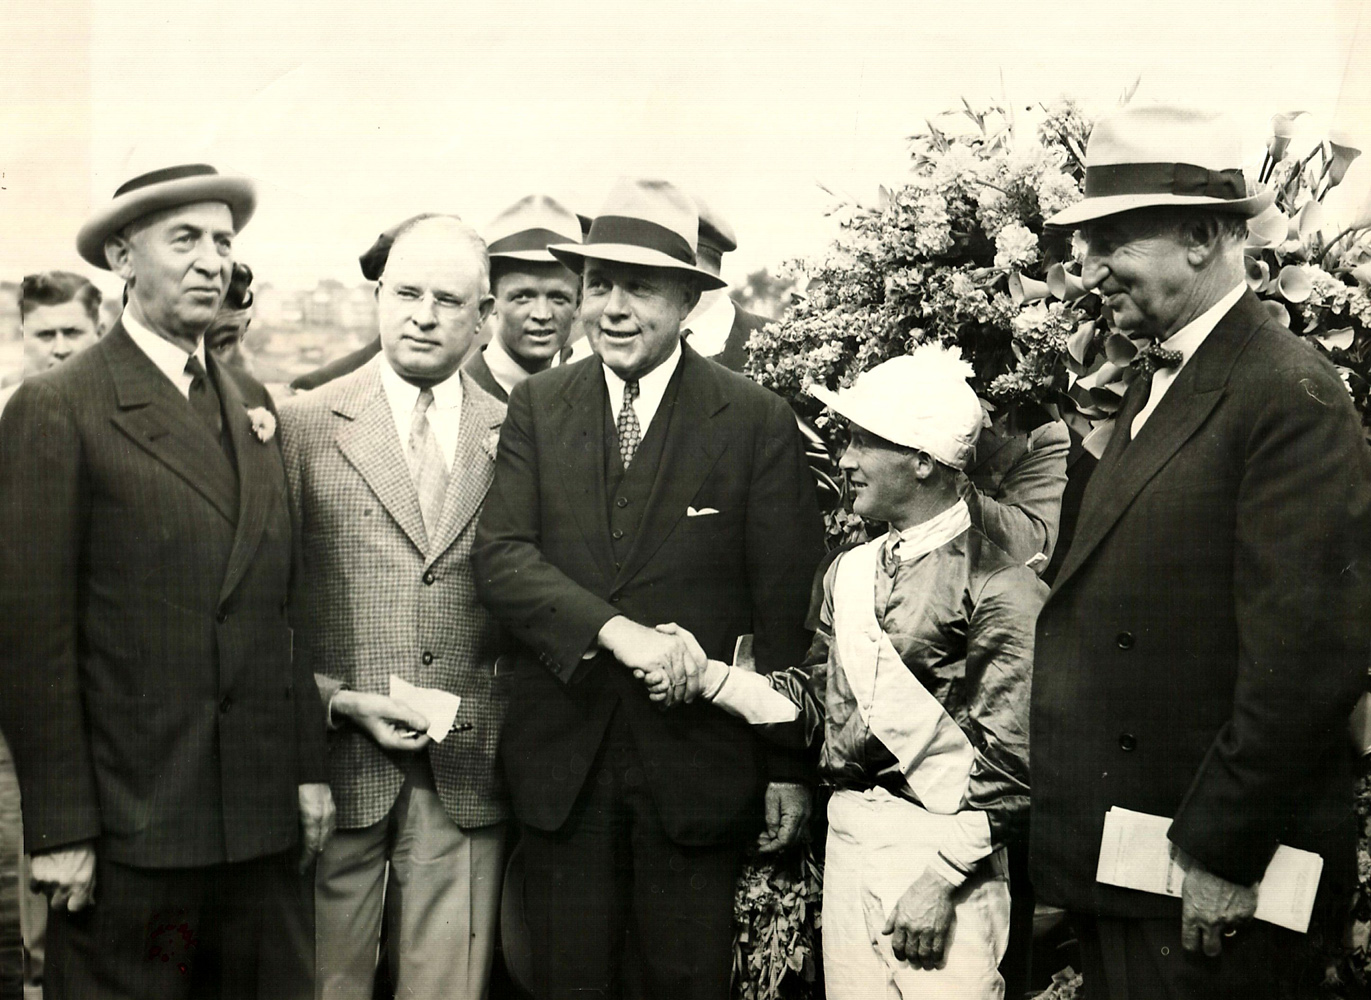 V. C. Wetmore, James H. Connors, Hal Price Headley, Nick Wall, and Charles F. Adams at the 1938 Massachusetts Handicap (Courtesy of Ken Grayson)